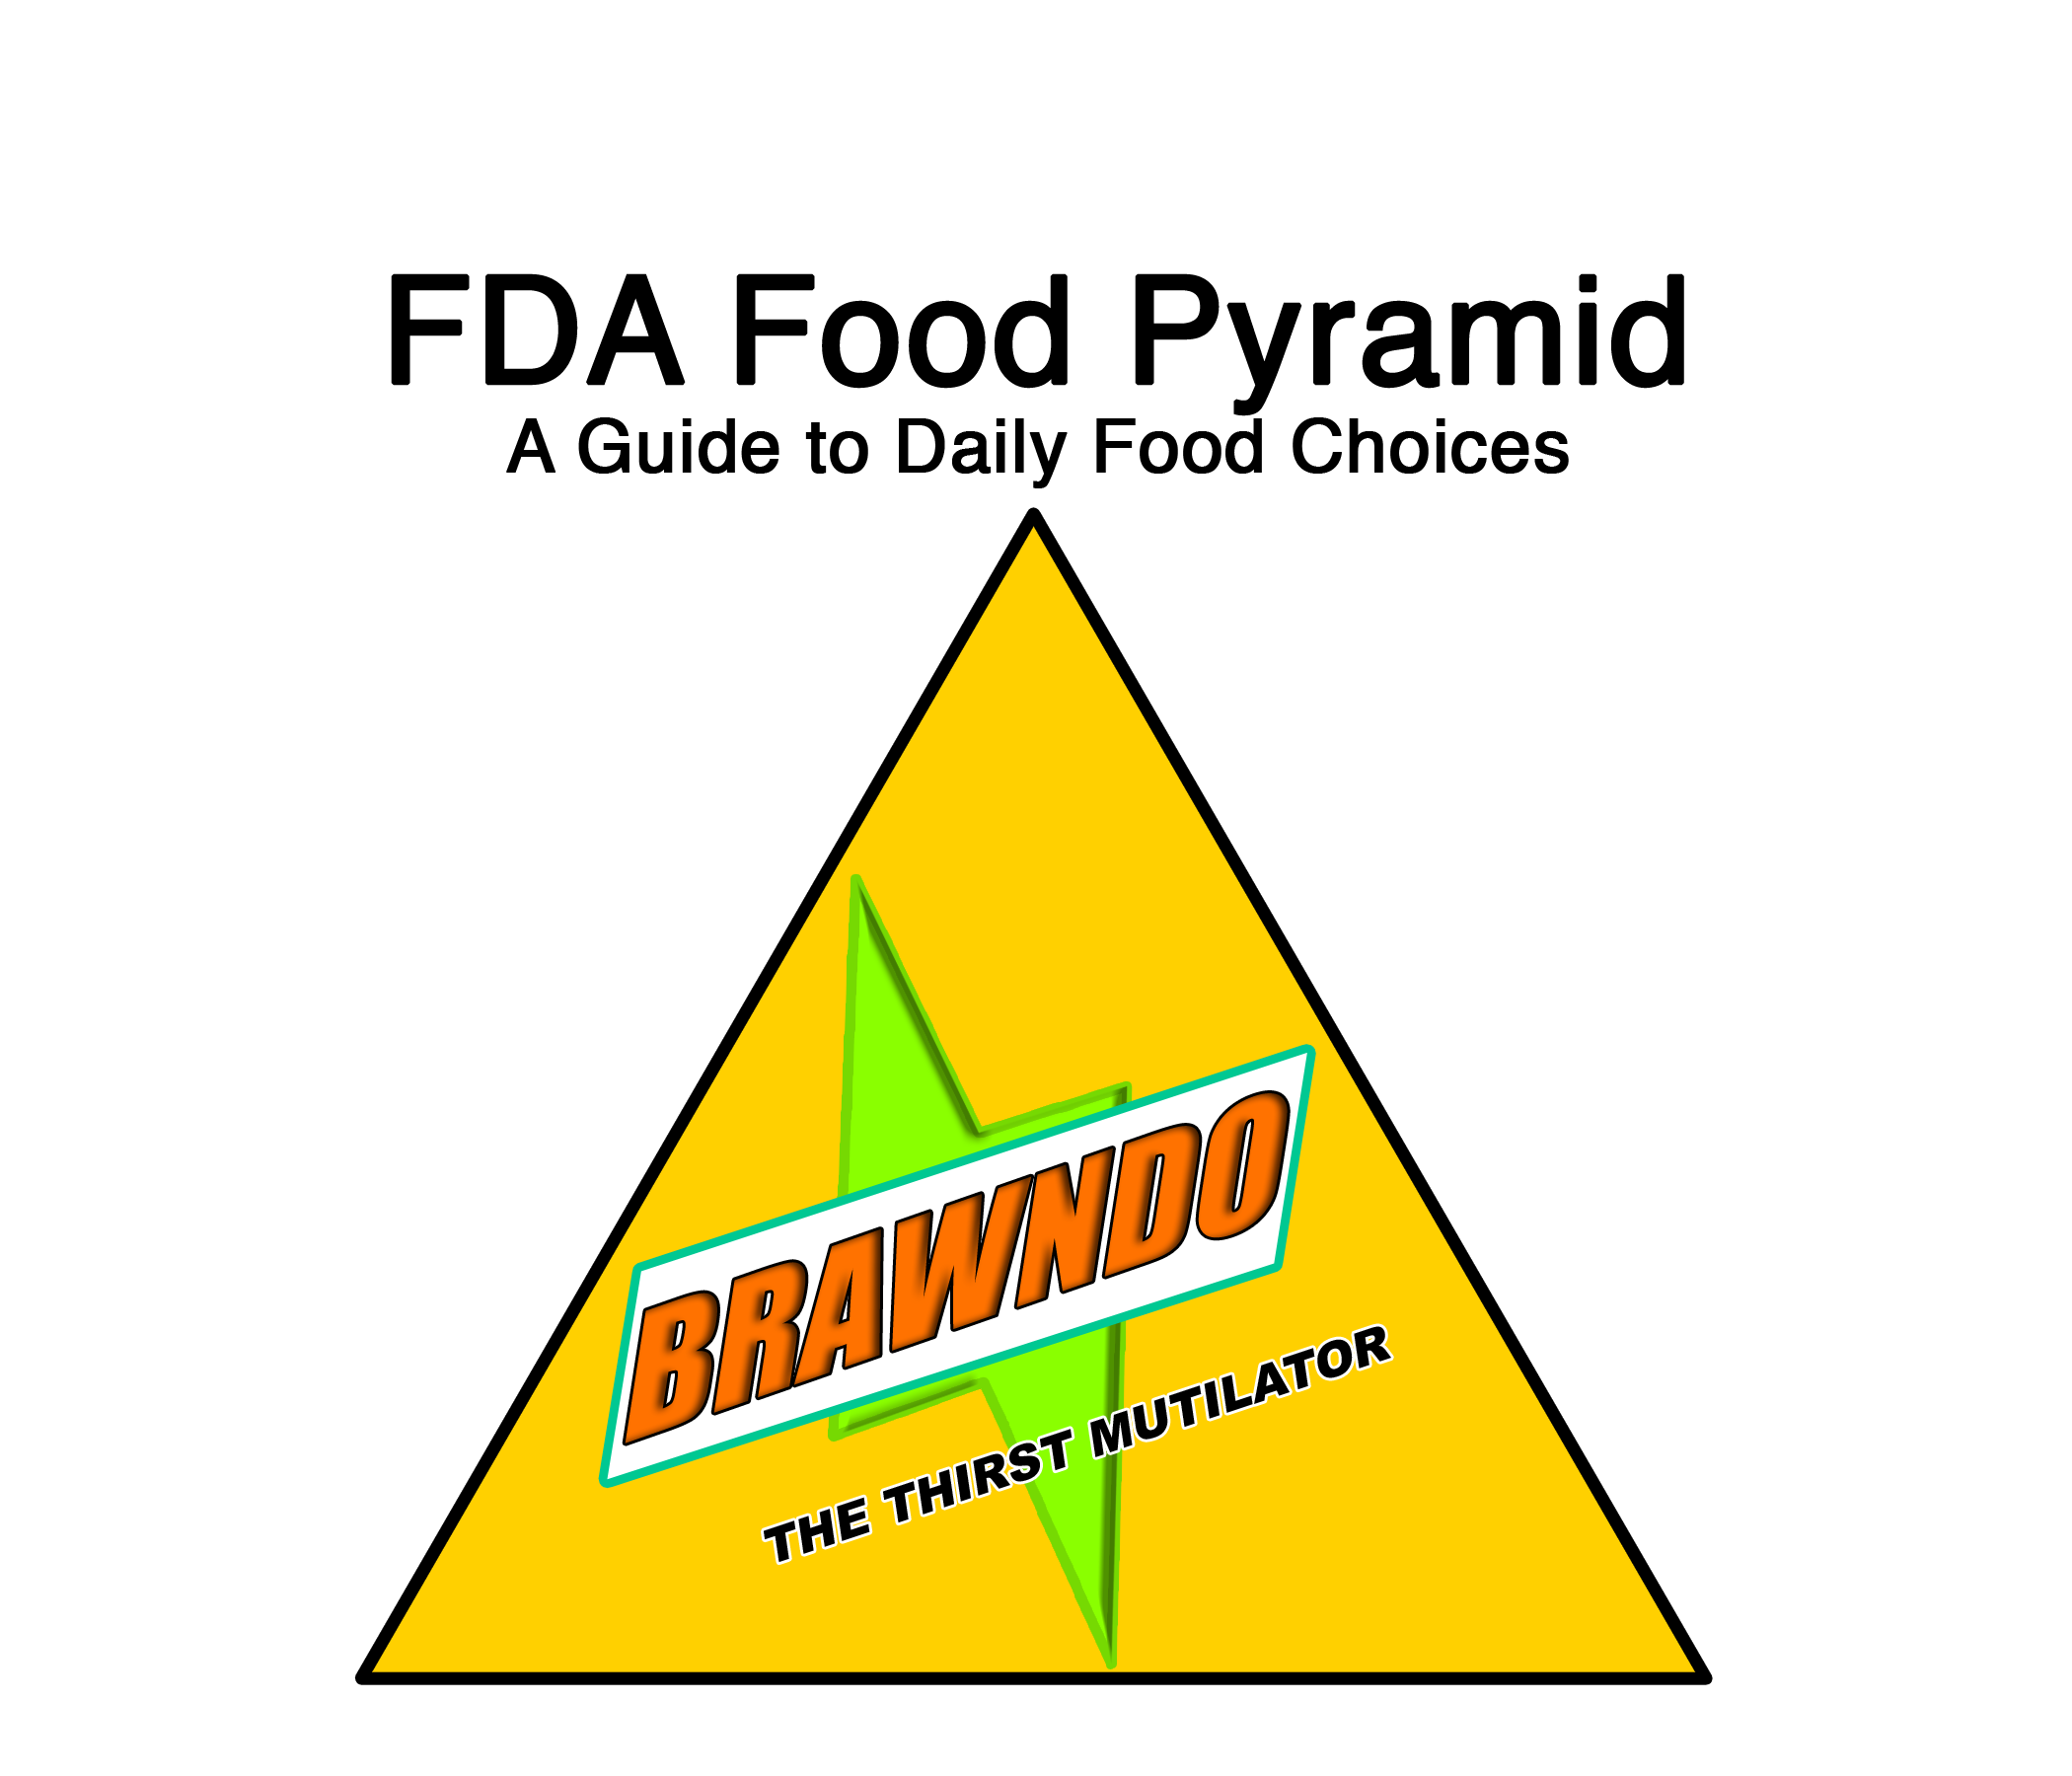 brawndo_the_thirst_mutilator_by_sicklysuite-d4jsh4a.png